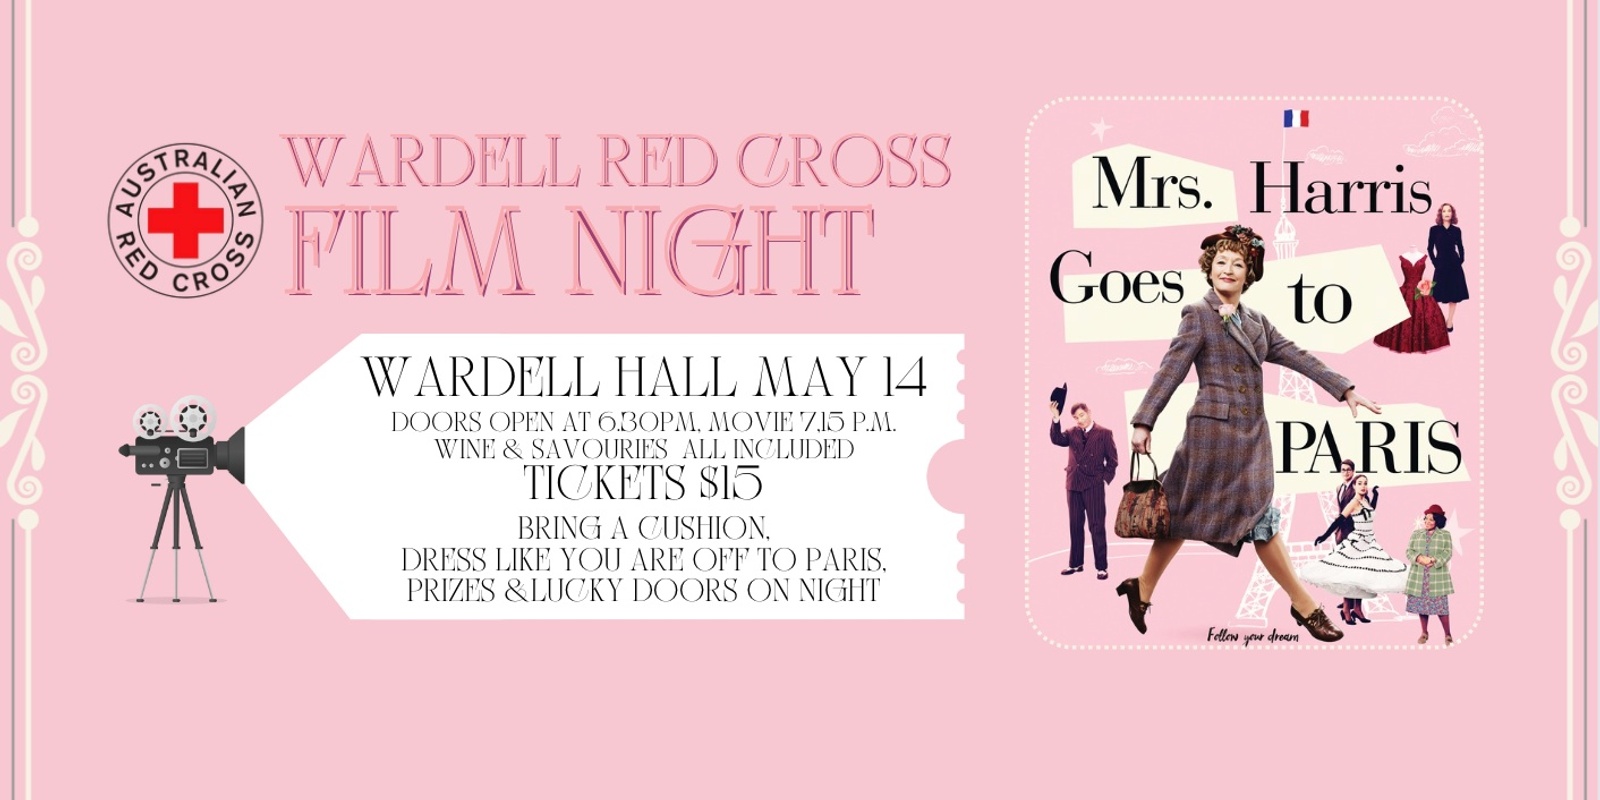 Banner image for Wardell Red Cross Film Night